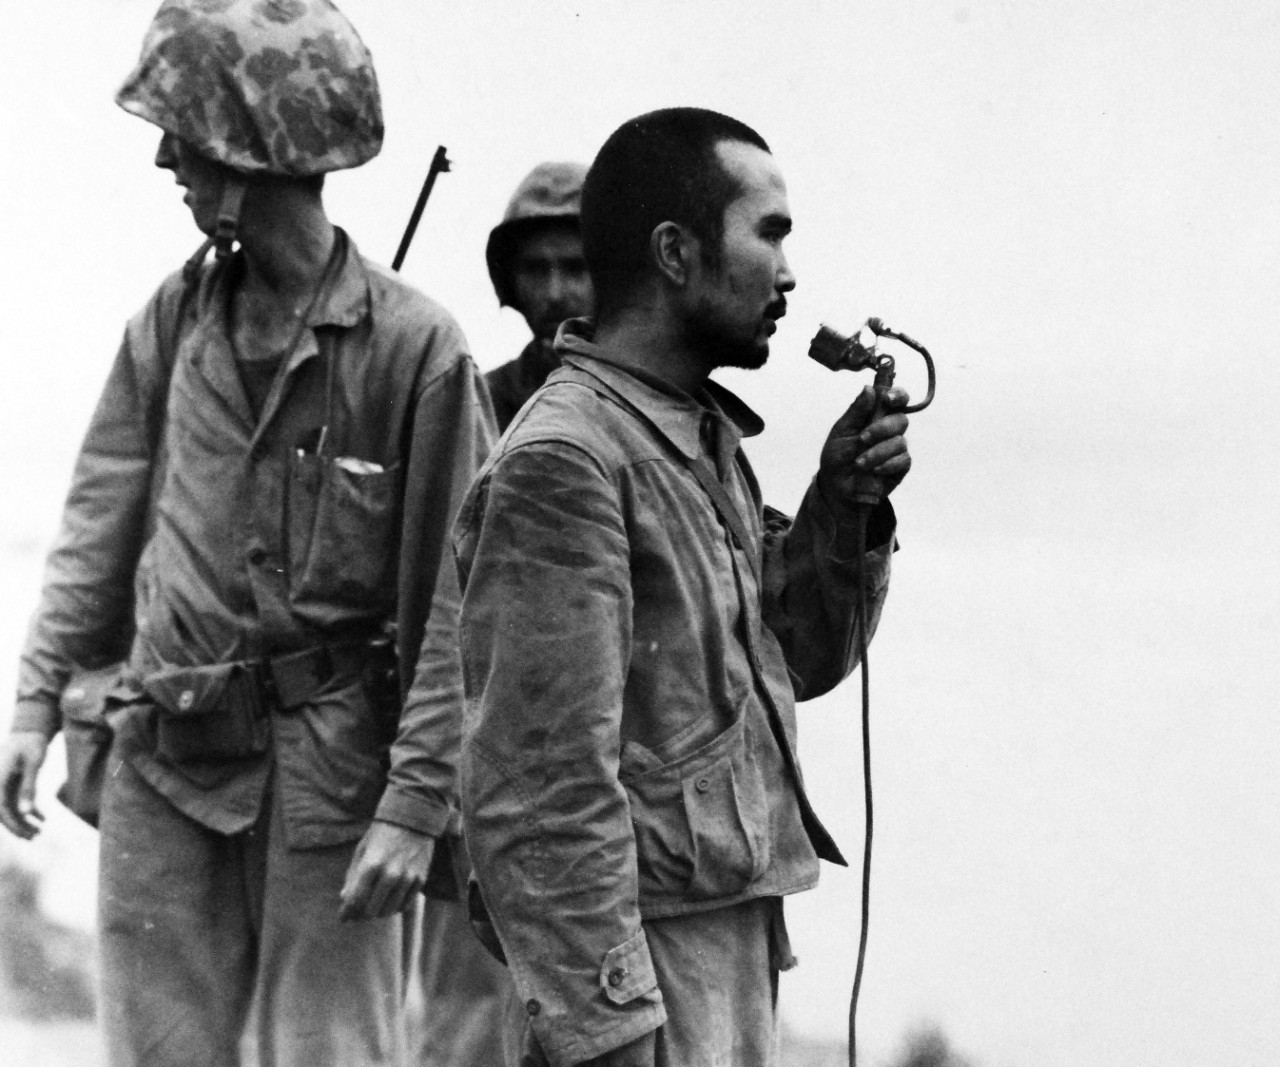 80-G-287247:   Invasion of Saipan, June-July 1944.  Japanese soldiers taken prisoner after being persuaded to come out of caves near Marpi Point on Saipan, Japanese soldier using loud speaker asking his friends to come out, July 12, 1944.  Photographed by USS Indianapolis (CA-35) photographer.   Official U.S. Navy Photograph, now in the collections of the National Archives.  (2017/03/21).  